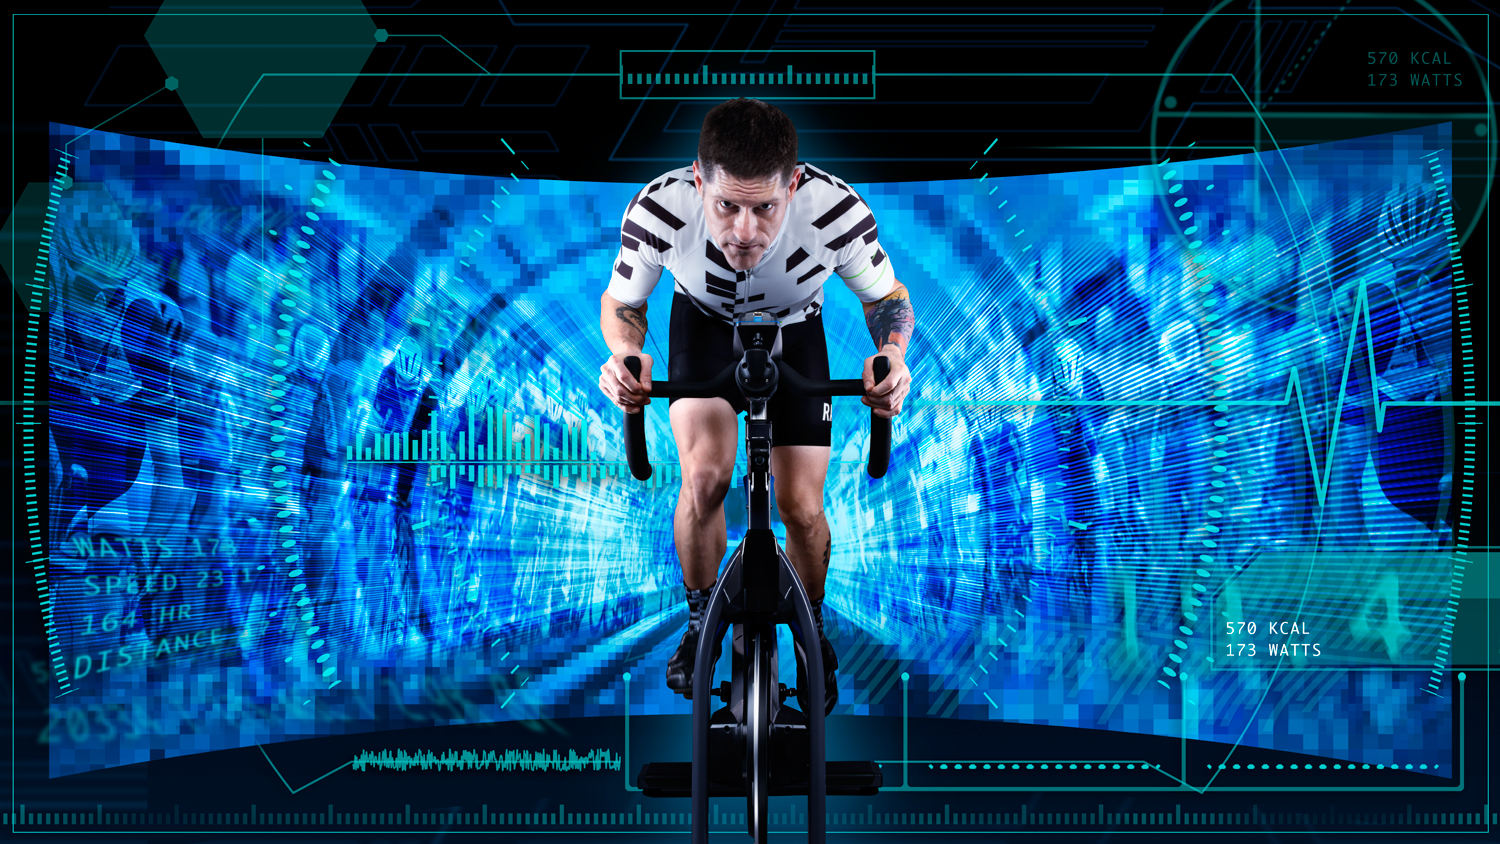 Digital art composite of rider on Stages Cycling stationary bicycle